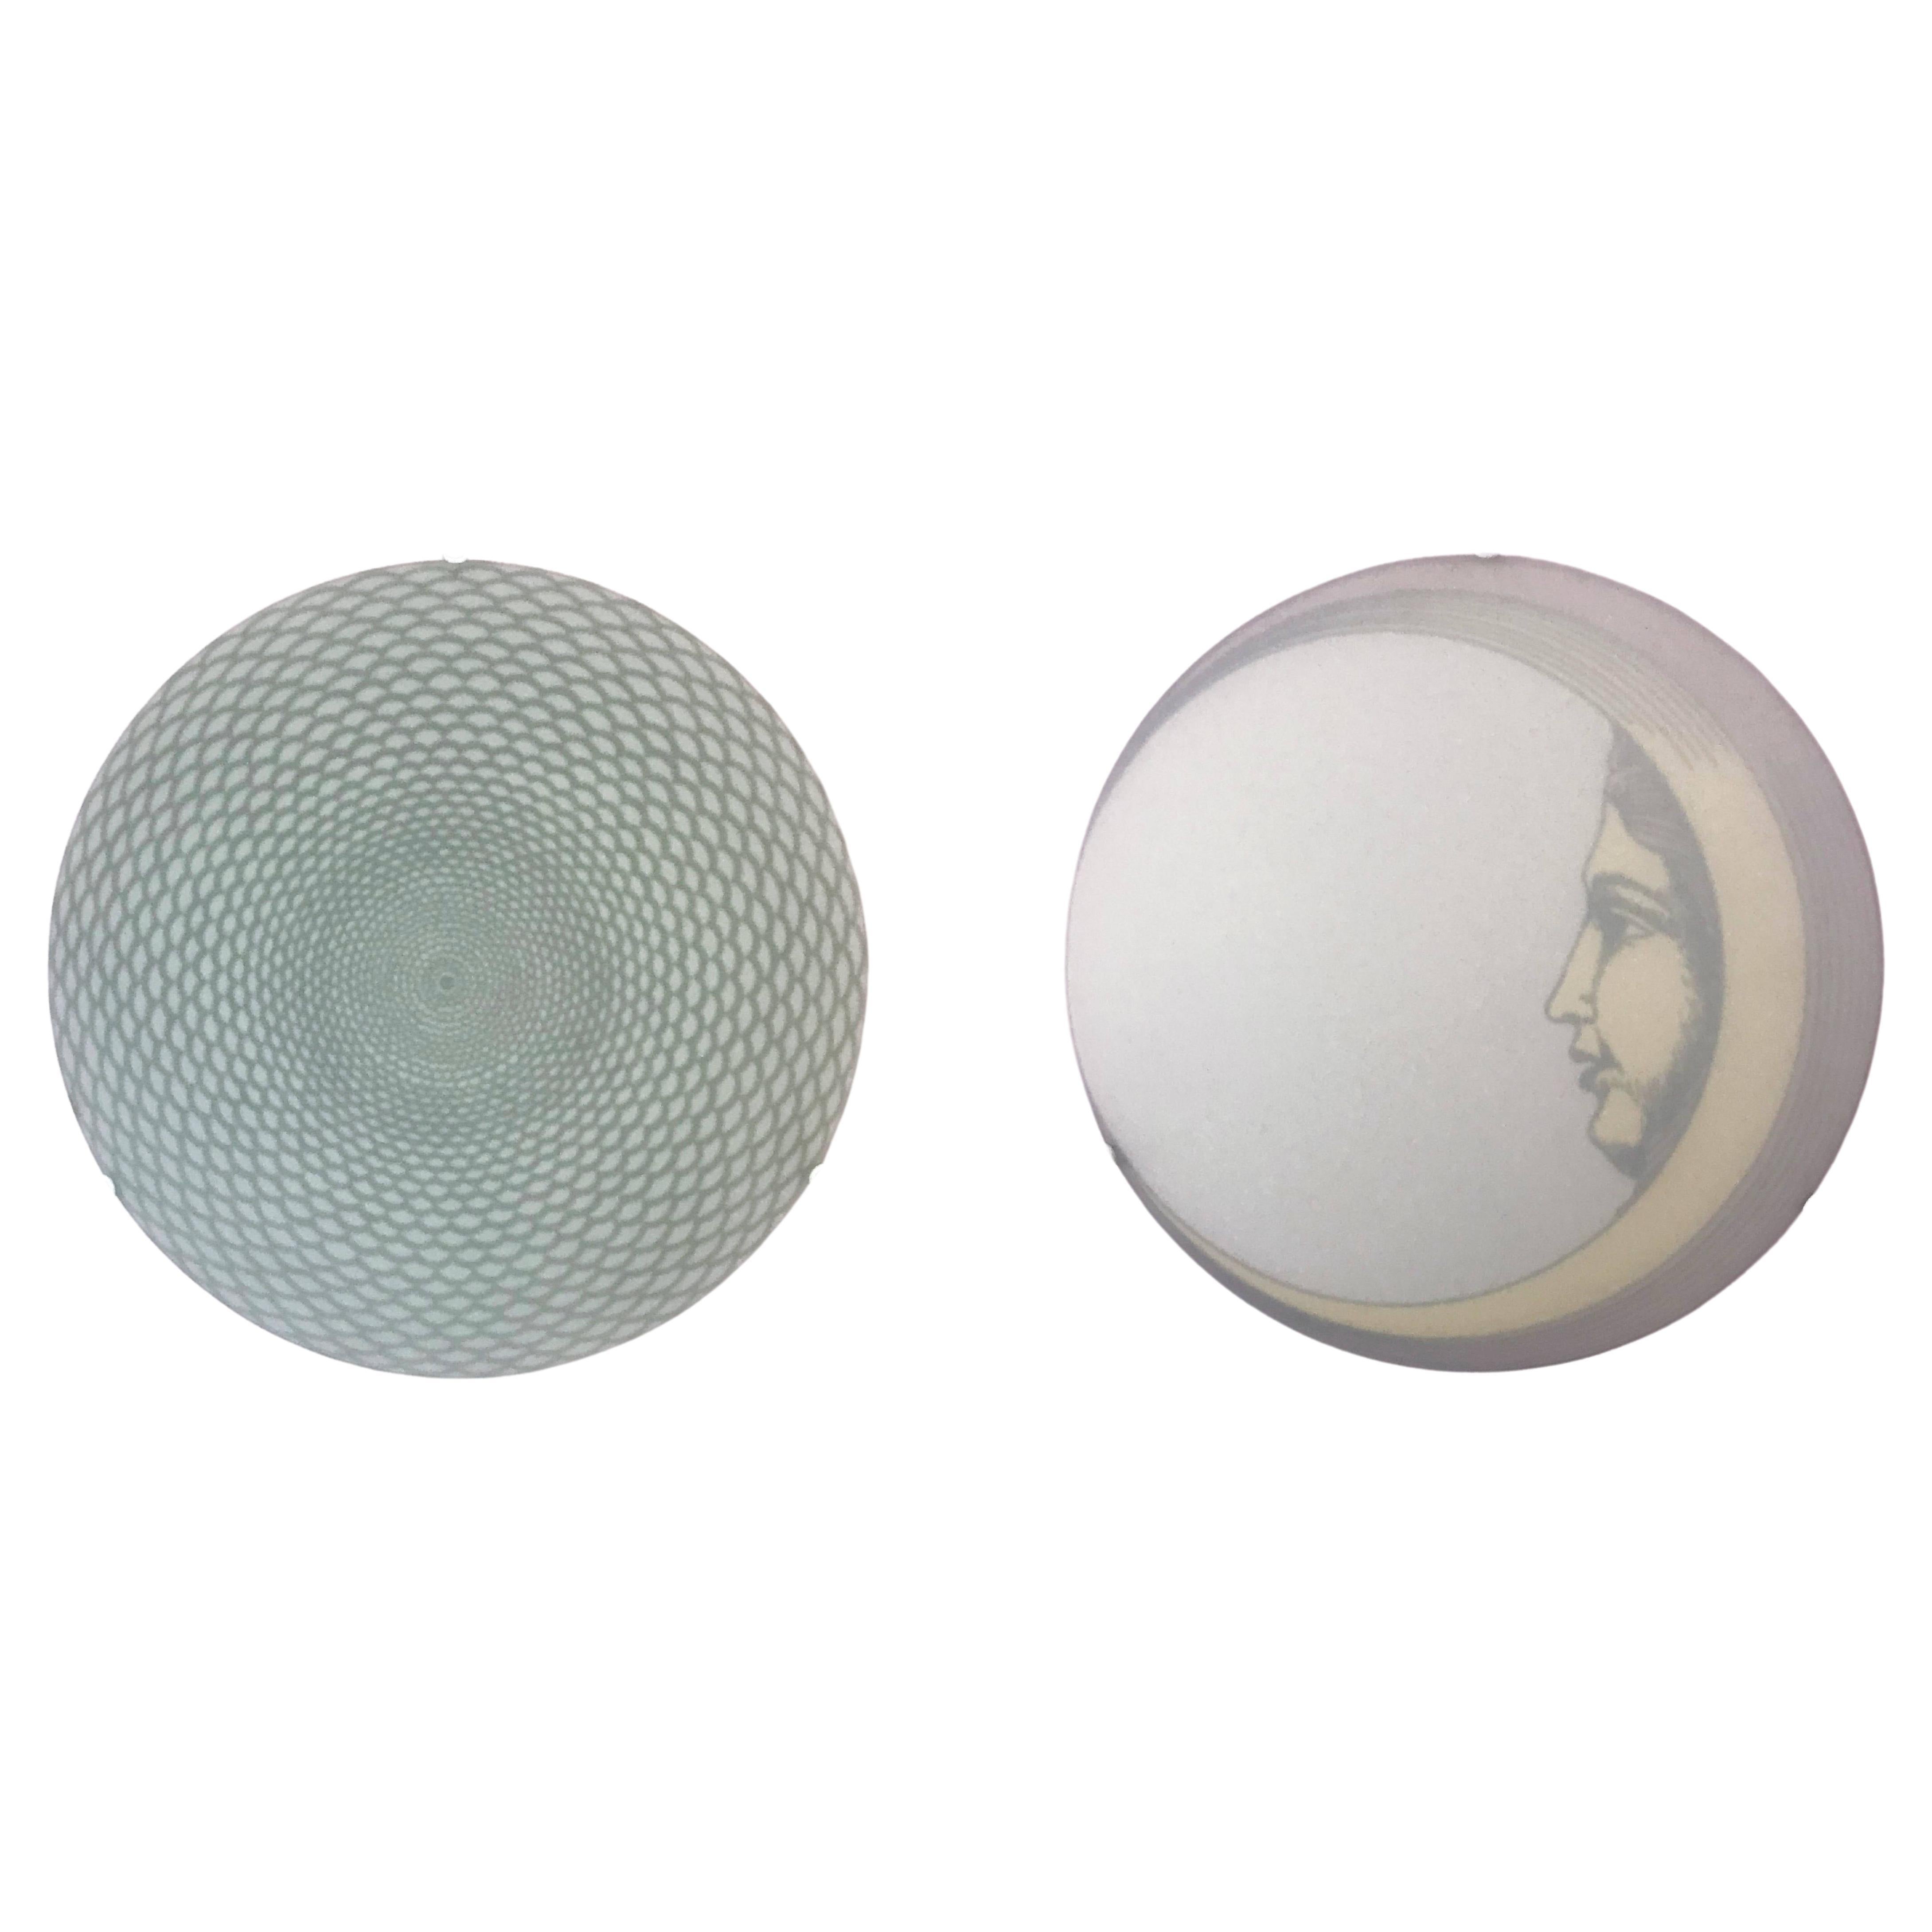 Fornasetti Geometric and Moon Sconces, 2 Available